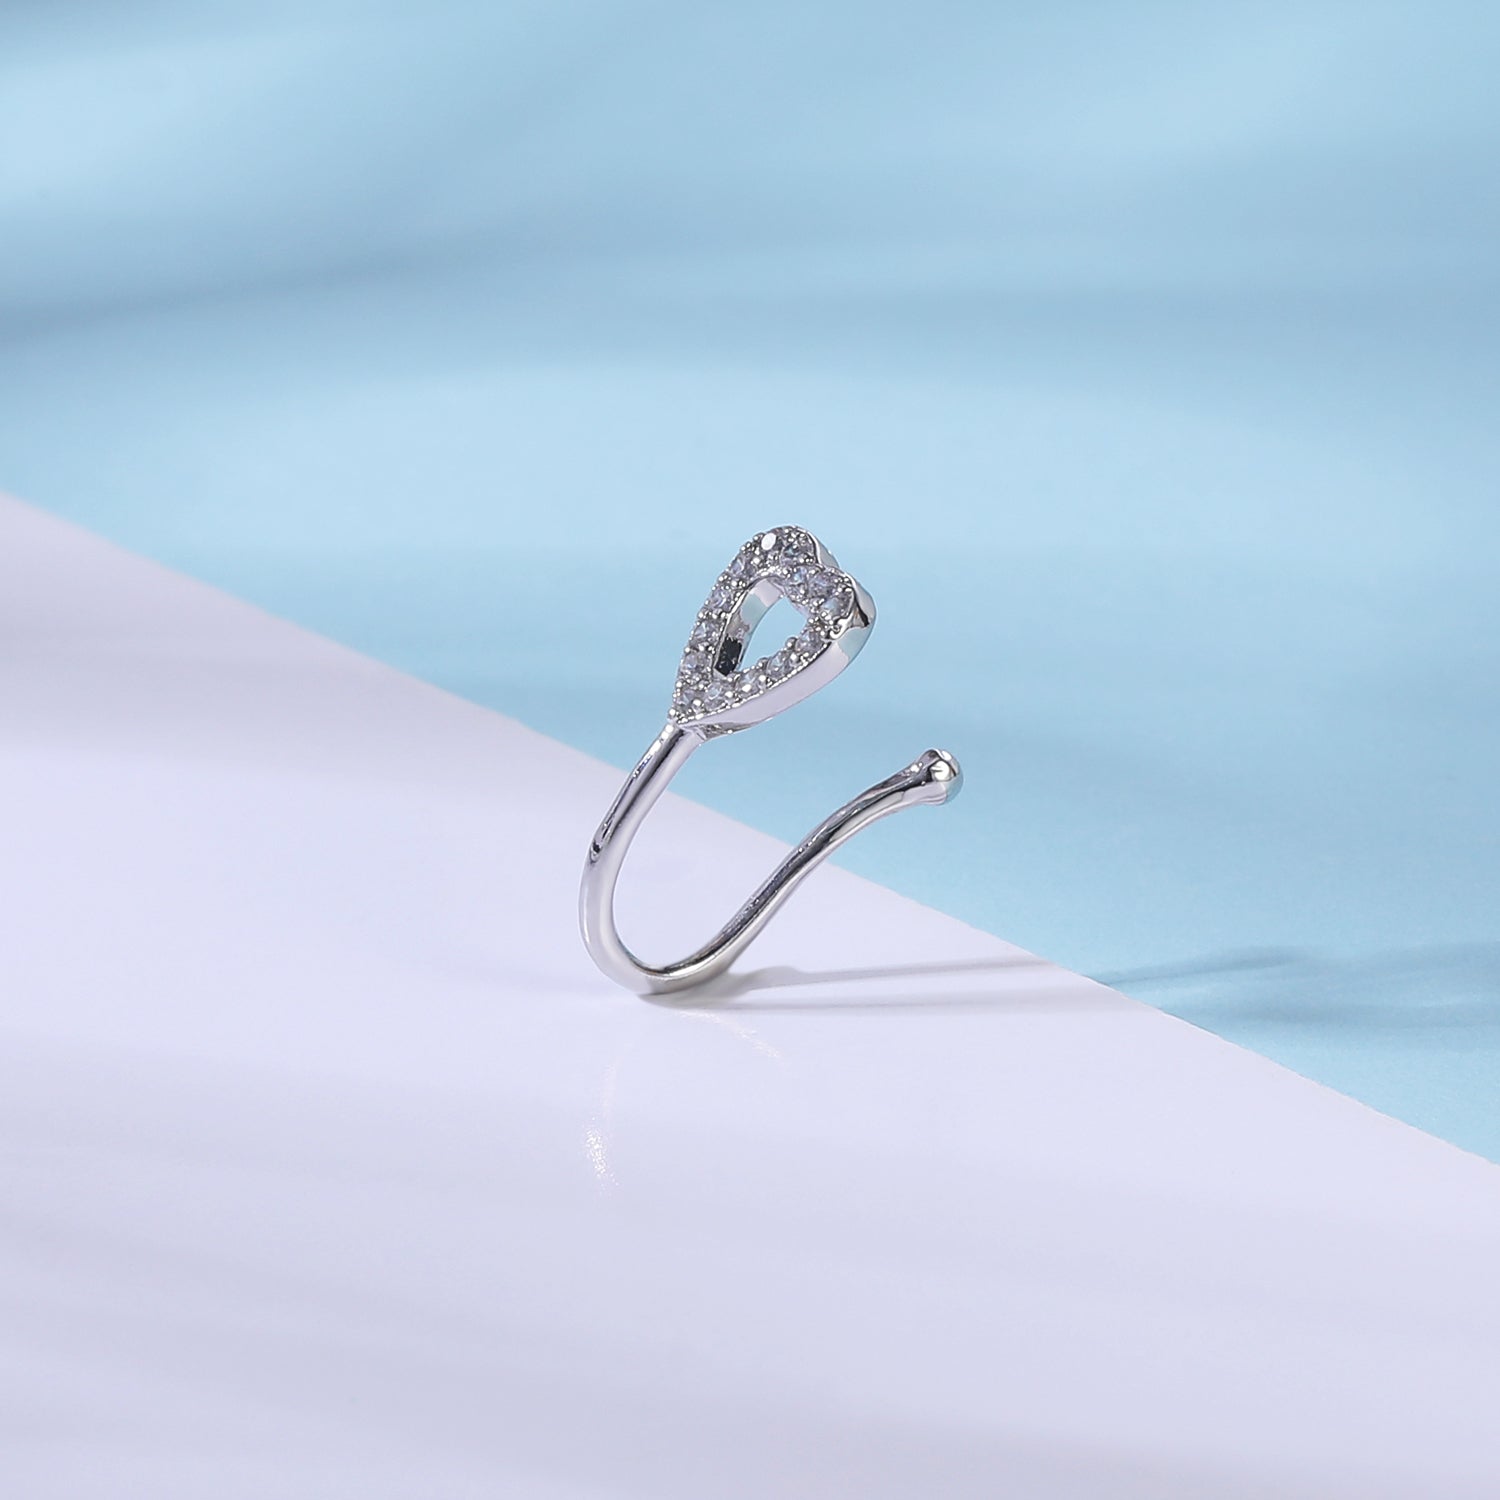 zs-white-zircon-heart-u-shaped-nose-clip-simple-stainless-steel-fake-nose-ring